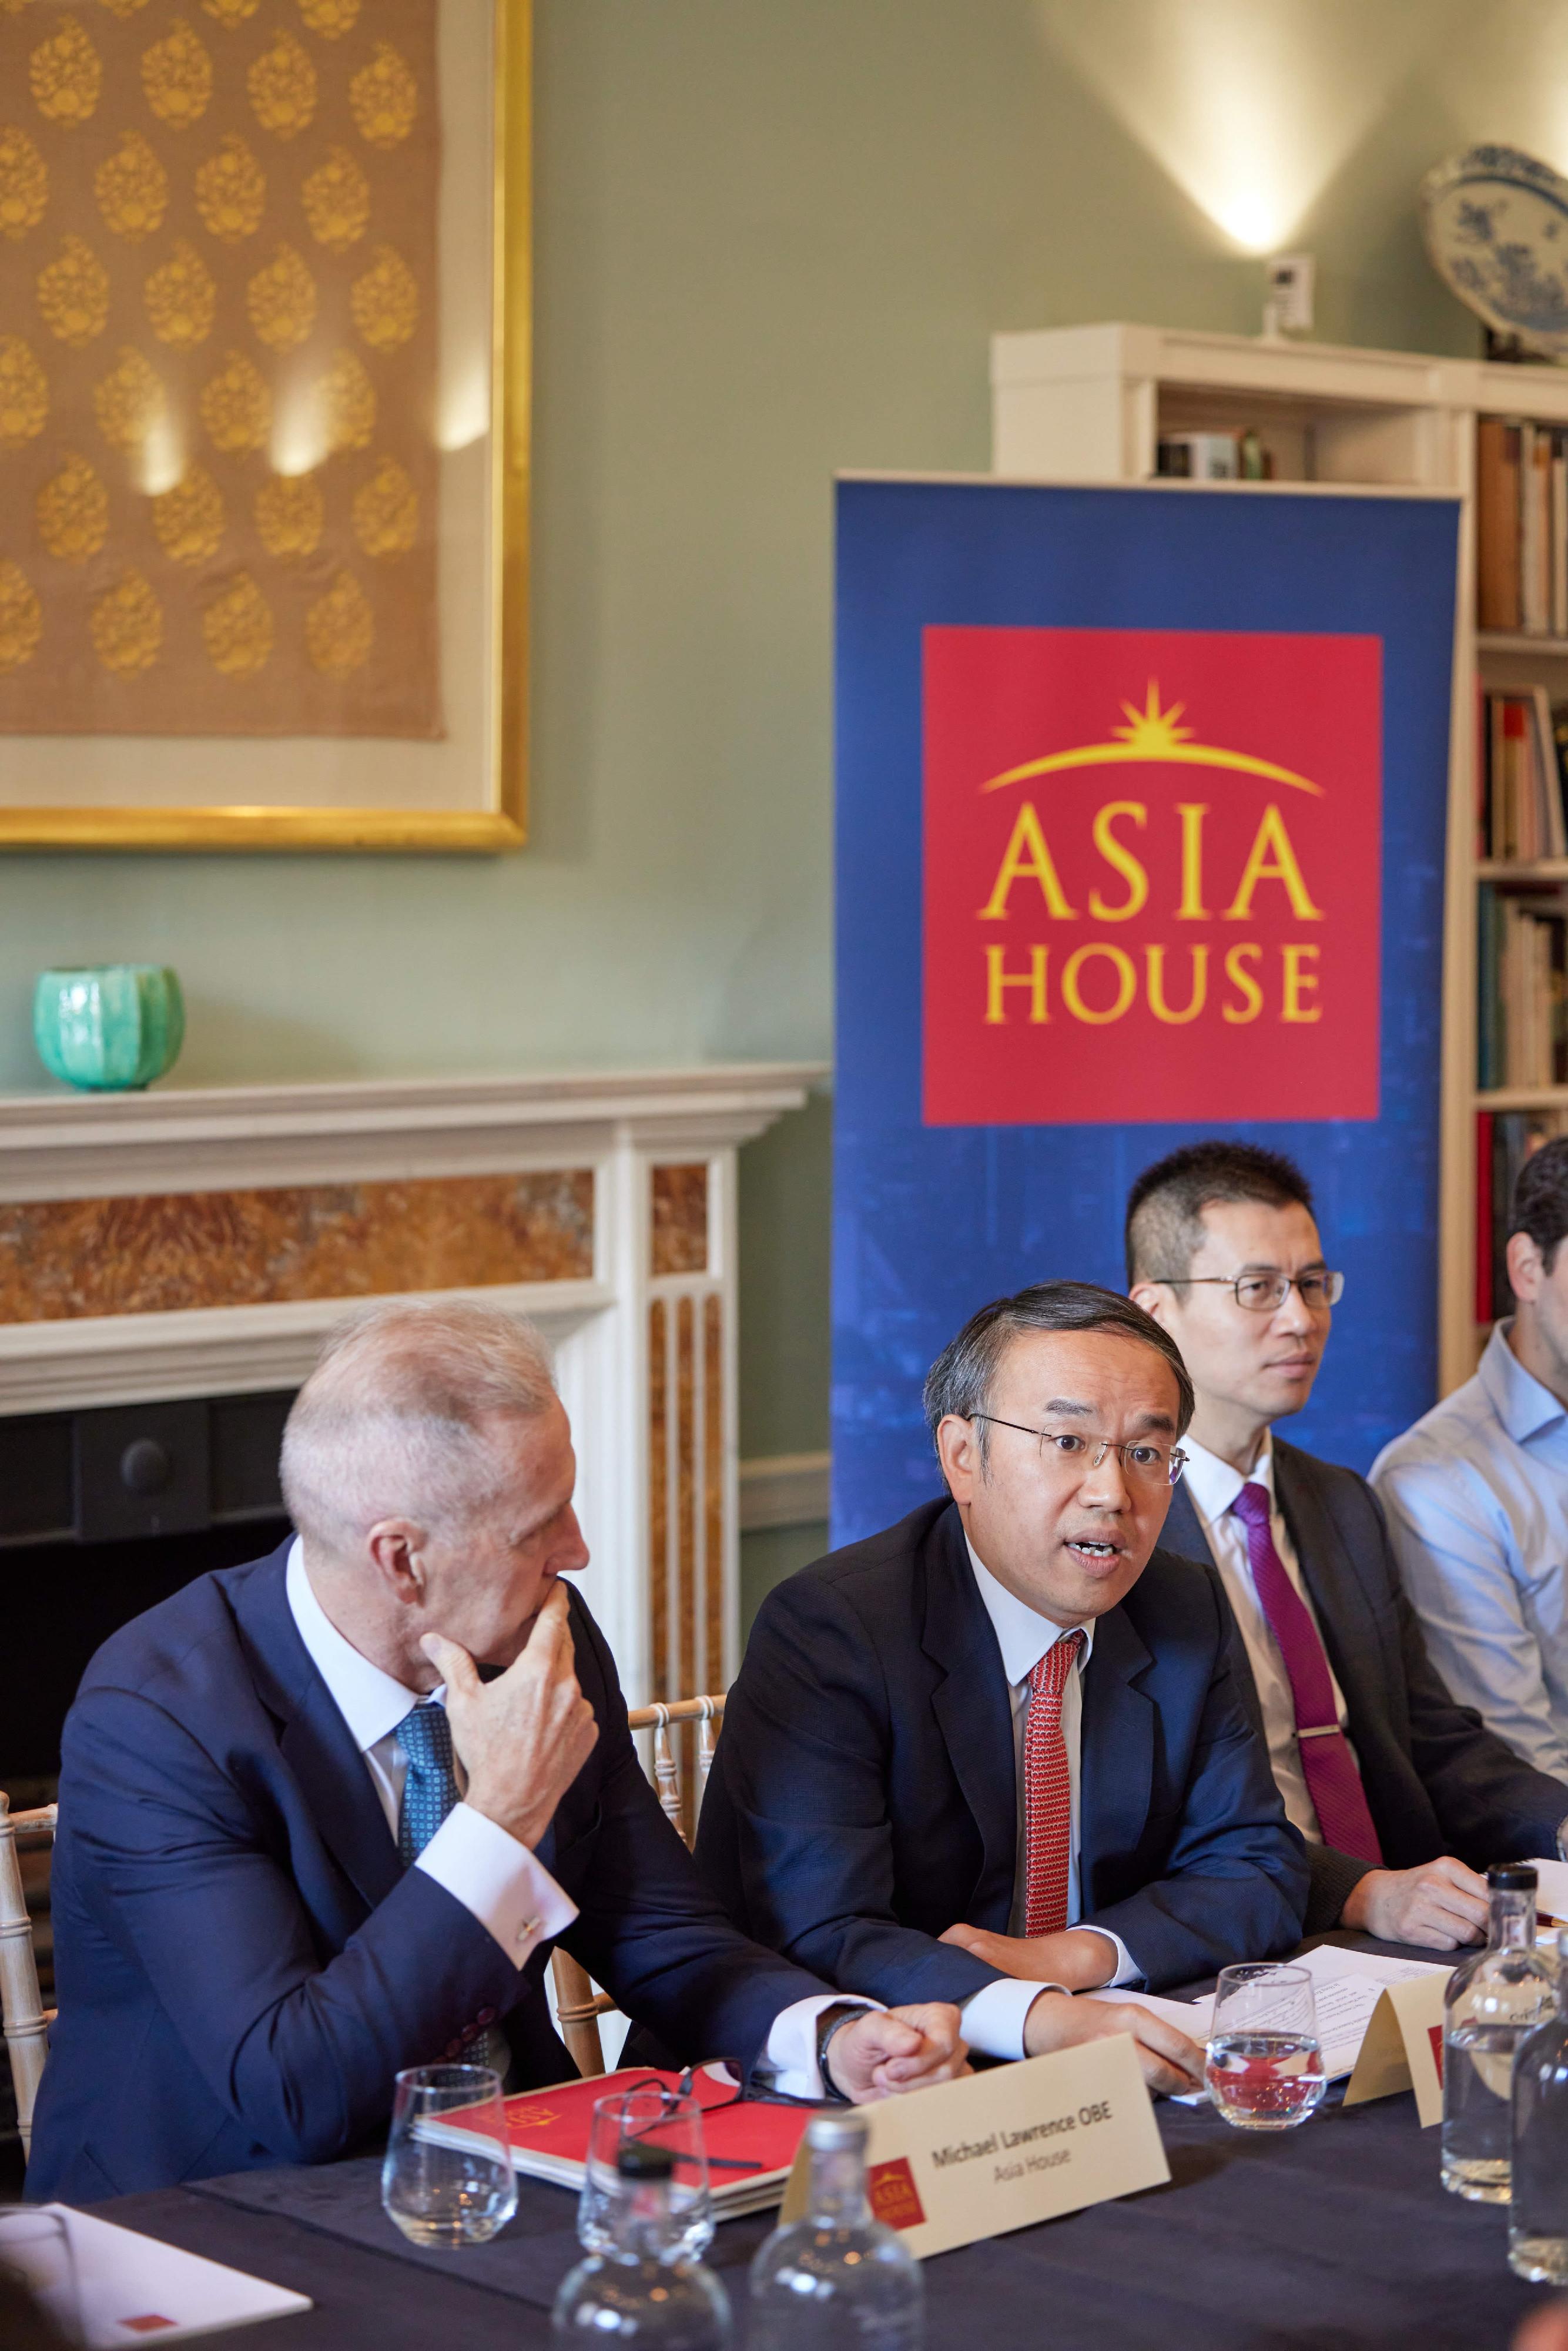 The Secretary for Financial Services and the Treasury, Mr Christopher Hui (second left), yesterday (April 18, London time) gave a briefing on the latest developments in Hong Kong to Asia House in London, the United Kingdom. Looking on are the Director-General of the Hong Kong Economic and Trade Office in London, Mr Gilford Law (third left), and the Chief Executive of Asia House, Mr Michael Lawrence (first left).